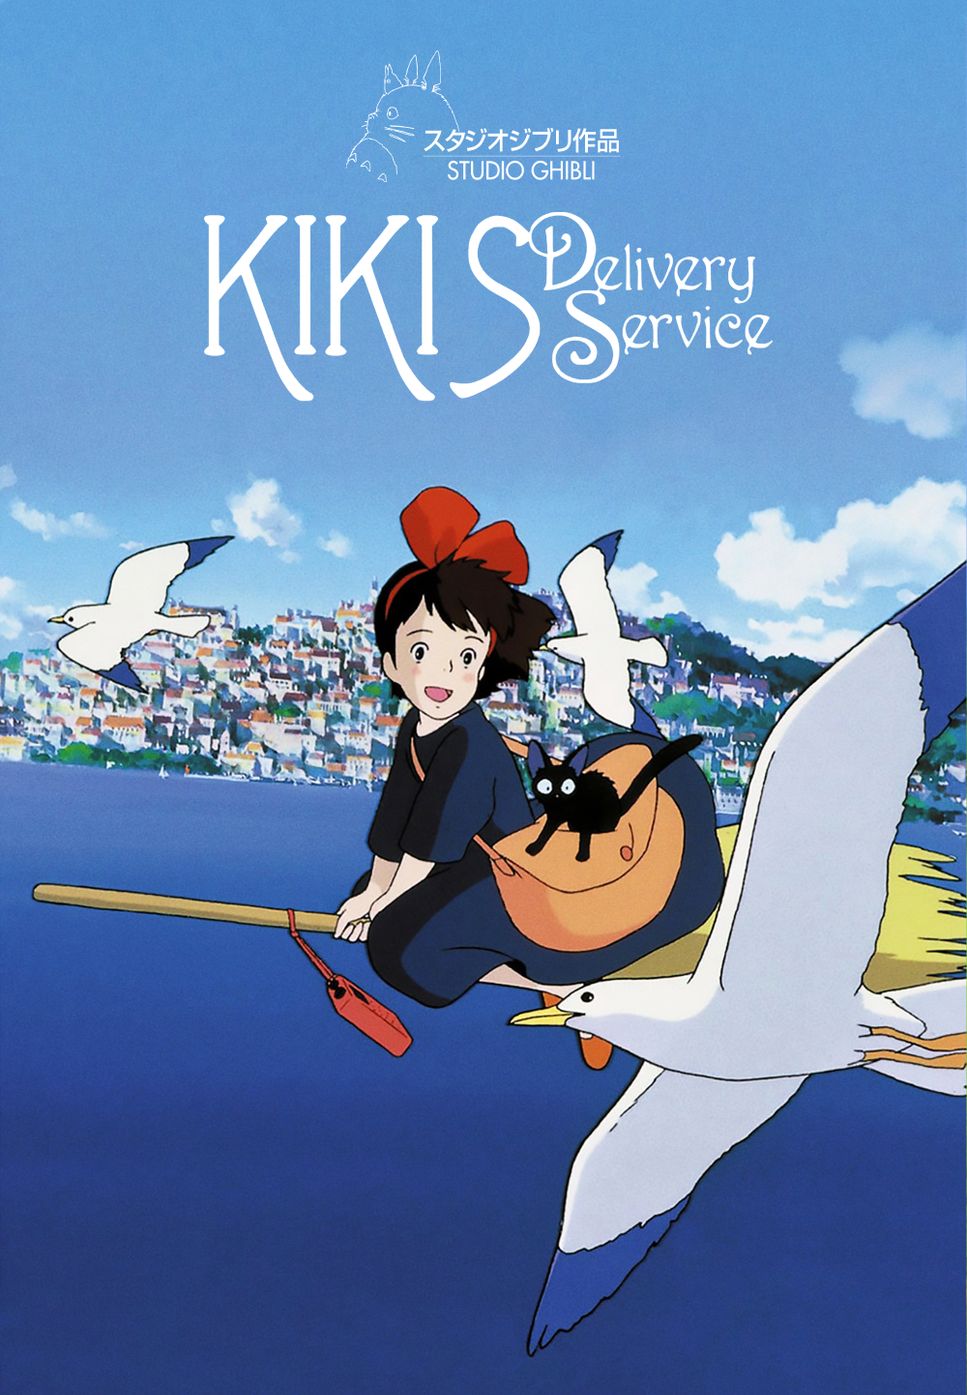 Hisaishi Joe - A Town with an Ocean View (Kiki's Delivery Service) by Seyoung